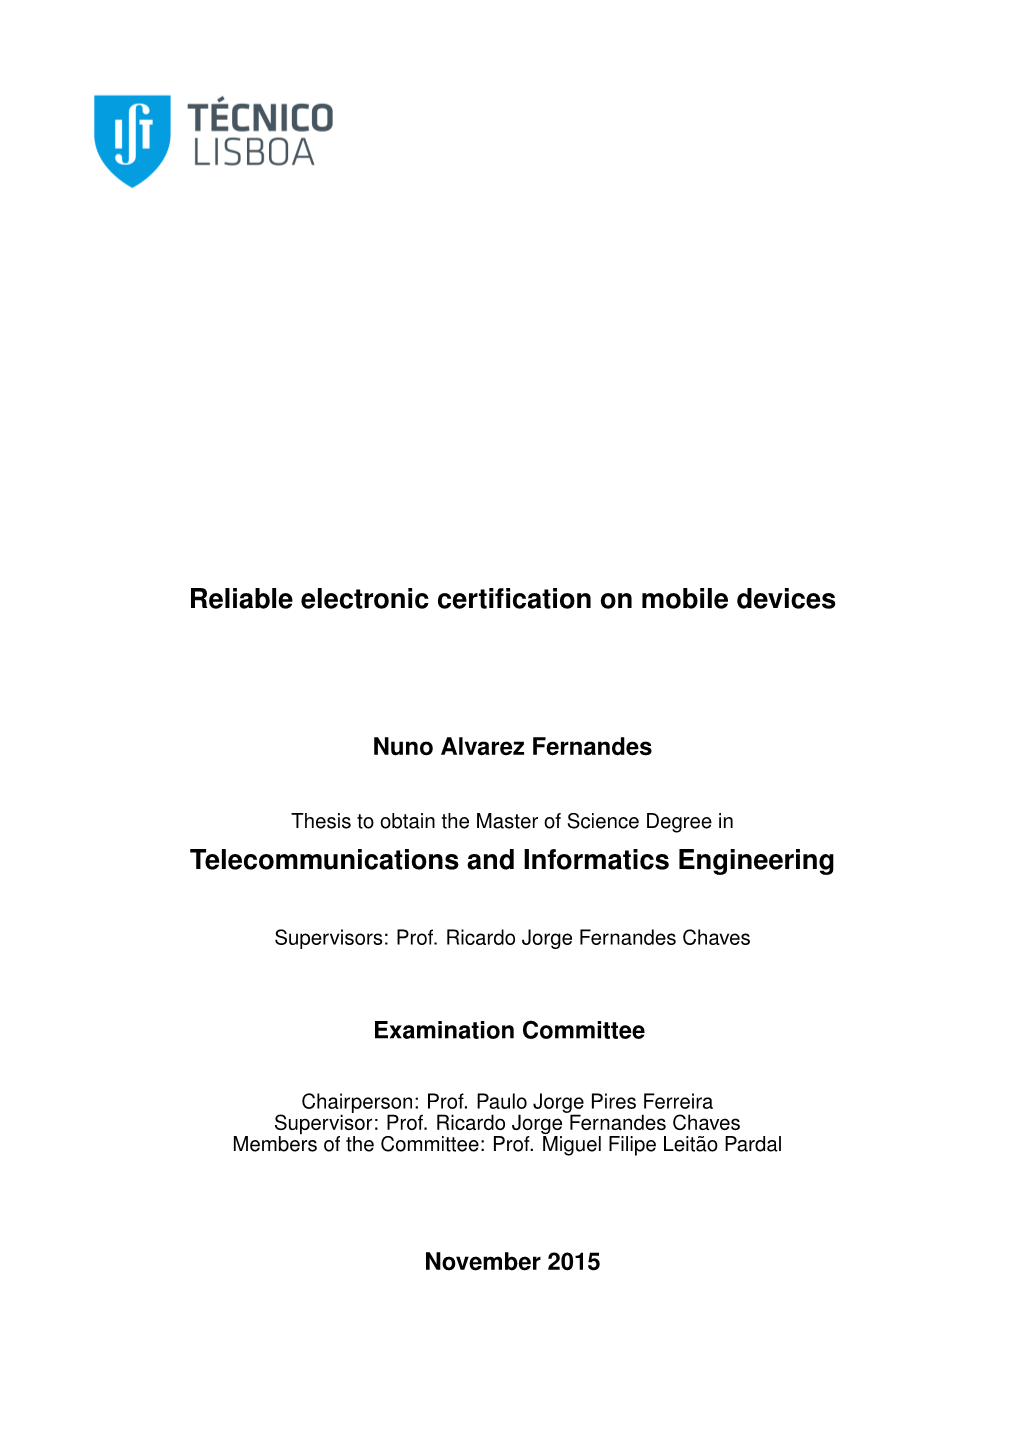 Reliable Electronic Certification on Mobile Devices